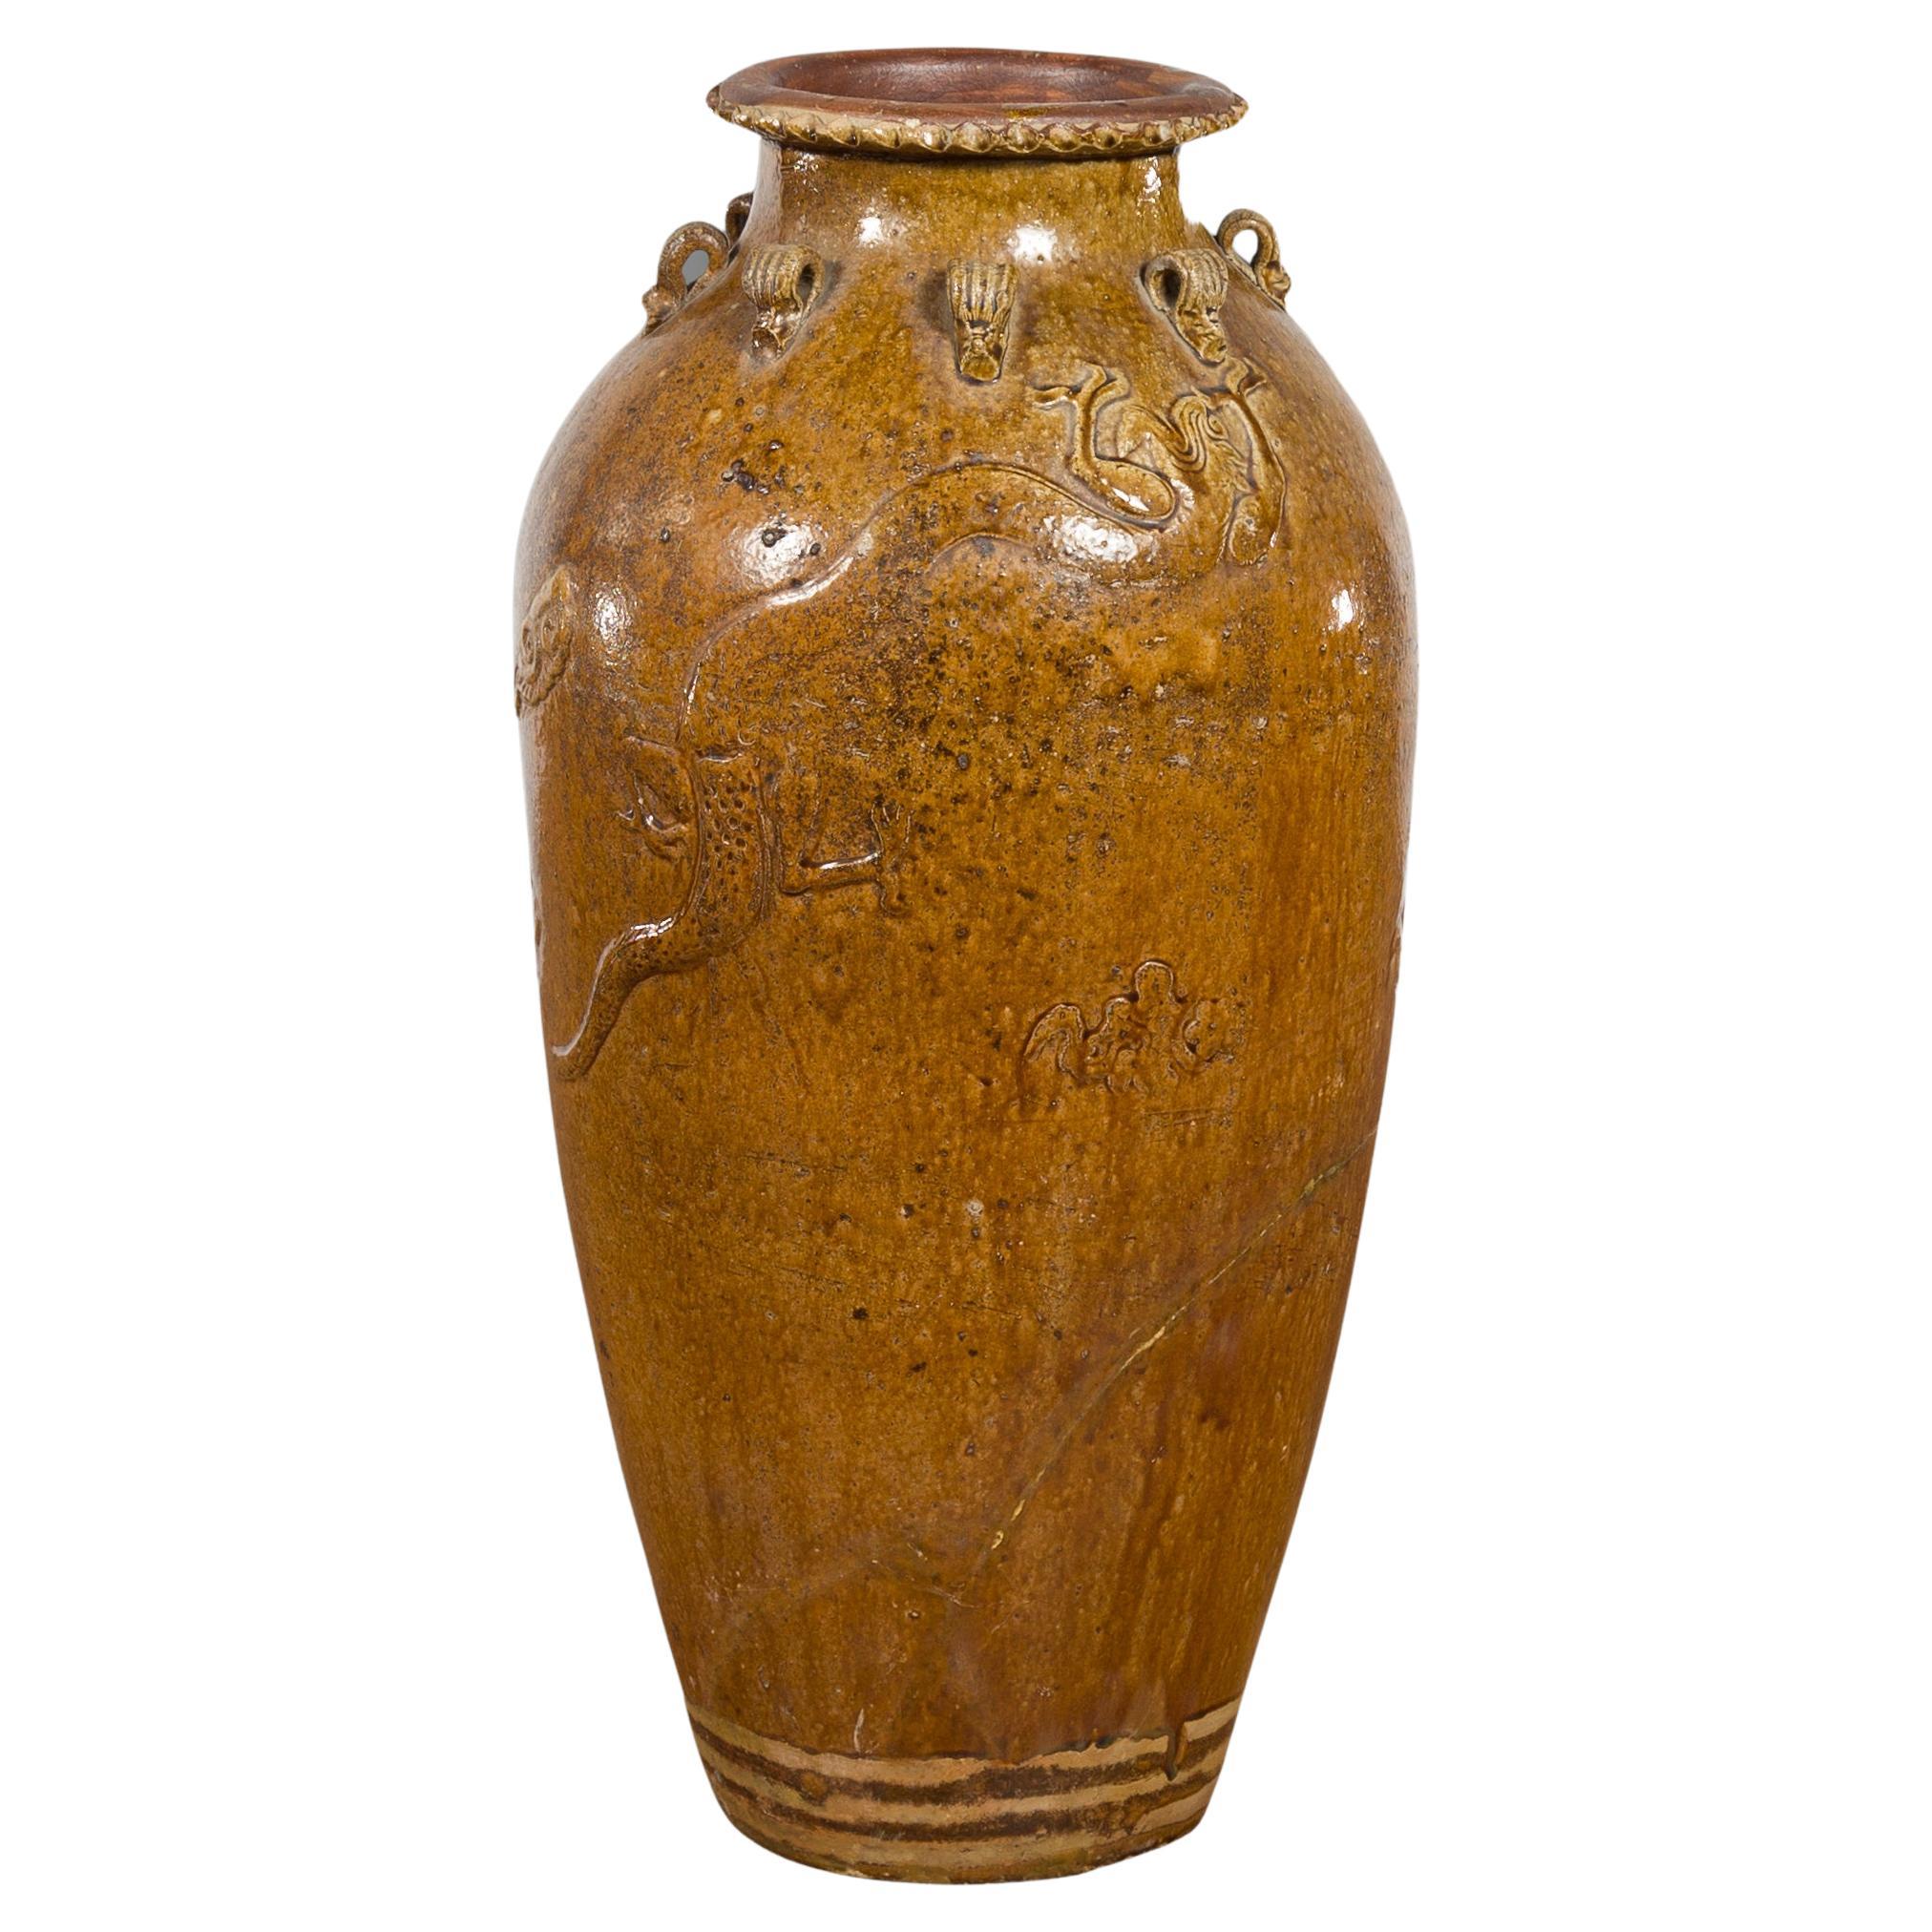 Tall Antique Qing Dynasty Period Martaban Jar from China, 18th-19th Century For Sale